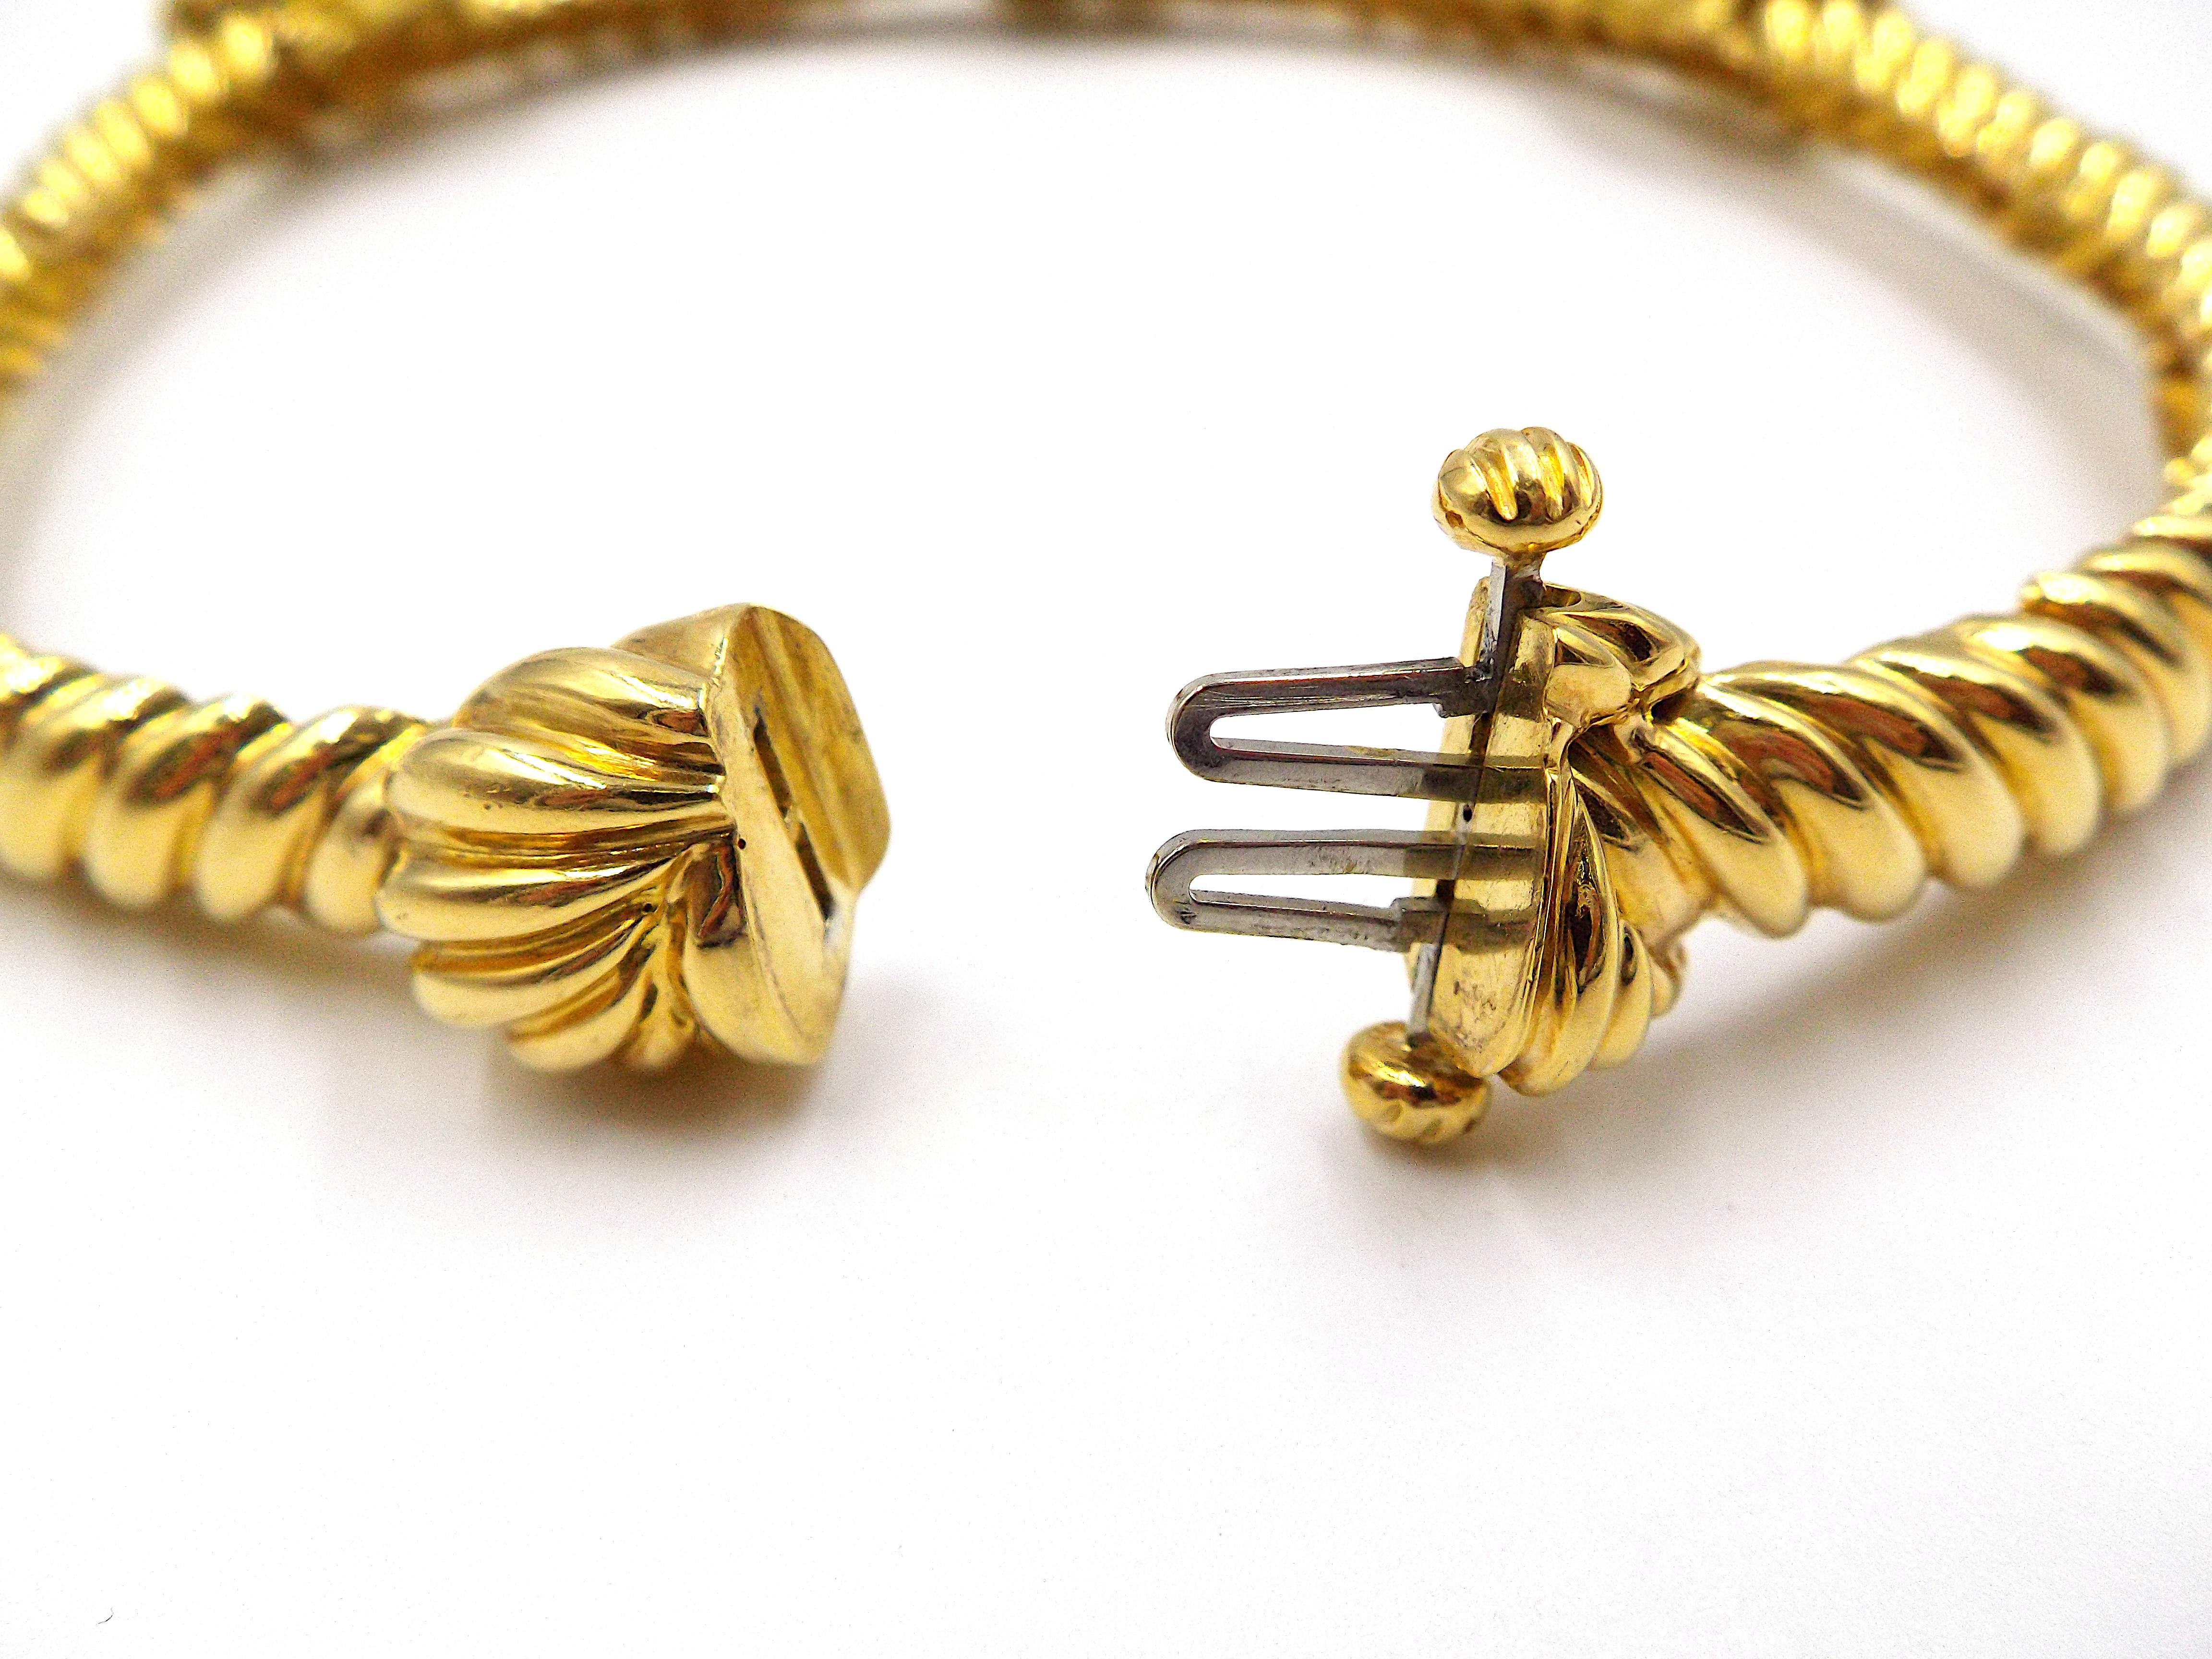 A chic vintage necklace by David Webb designed as a thick rope with three realistically styled knots. 18K yellow gold, signed David Webb, marked 18K, numbered. Weight is ap. 132.4g, lengths is ap. 14